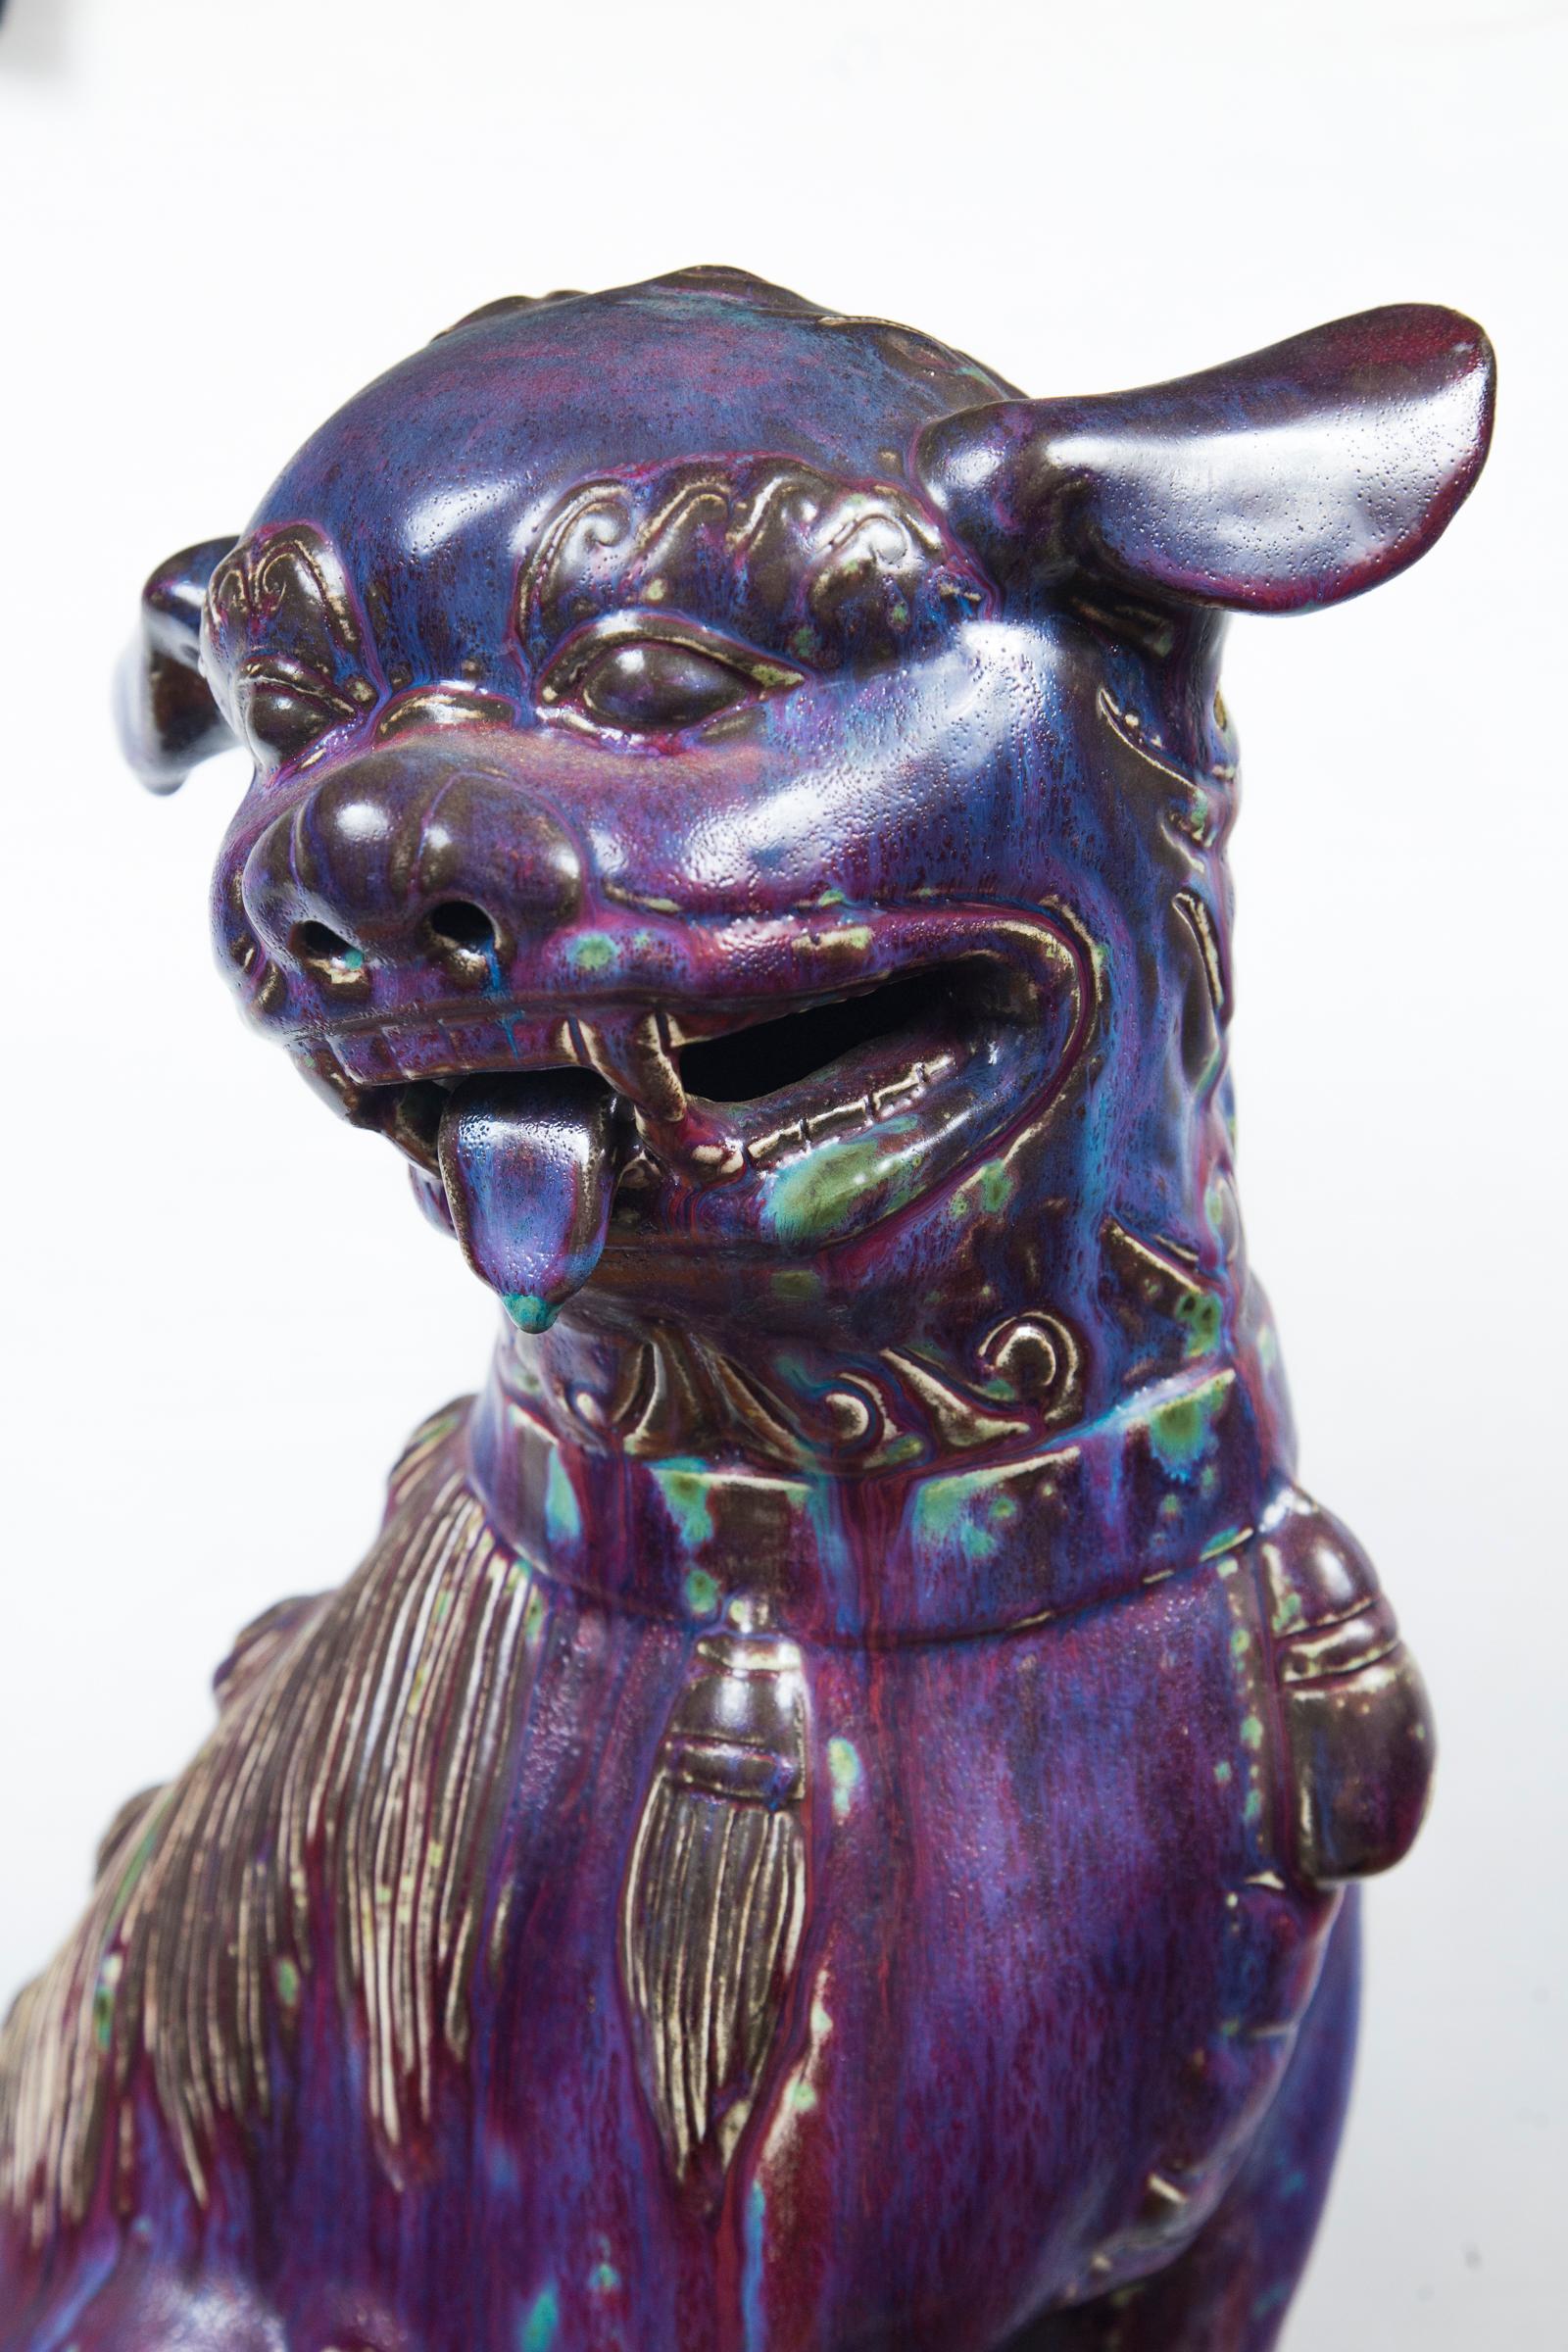 This is a female foo dog, as shown with her baby under her front right paw. Deep flambe glaze over pottery. Raised on a pierced rectangular pedestal.
The pedestal measures 8 tall, 10 .5 wide and 6.75 deep. The figure thus is 19 inches tall.